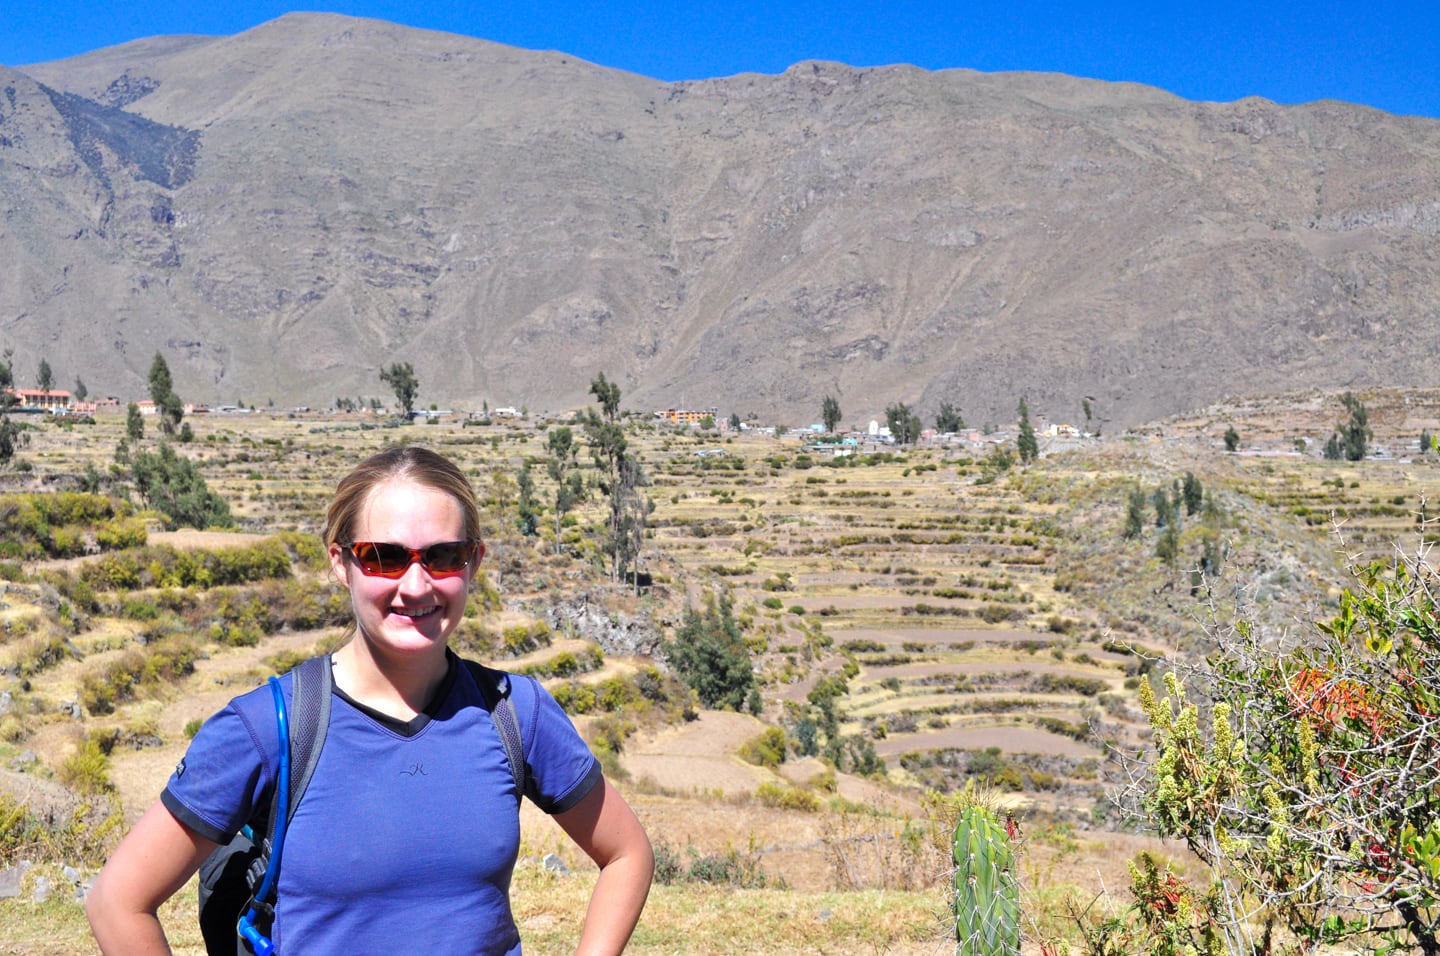 standing on the rim of the canyon after Colca Canyon Trek in Peru